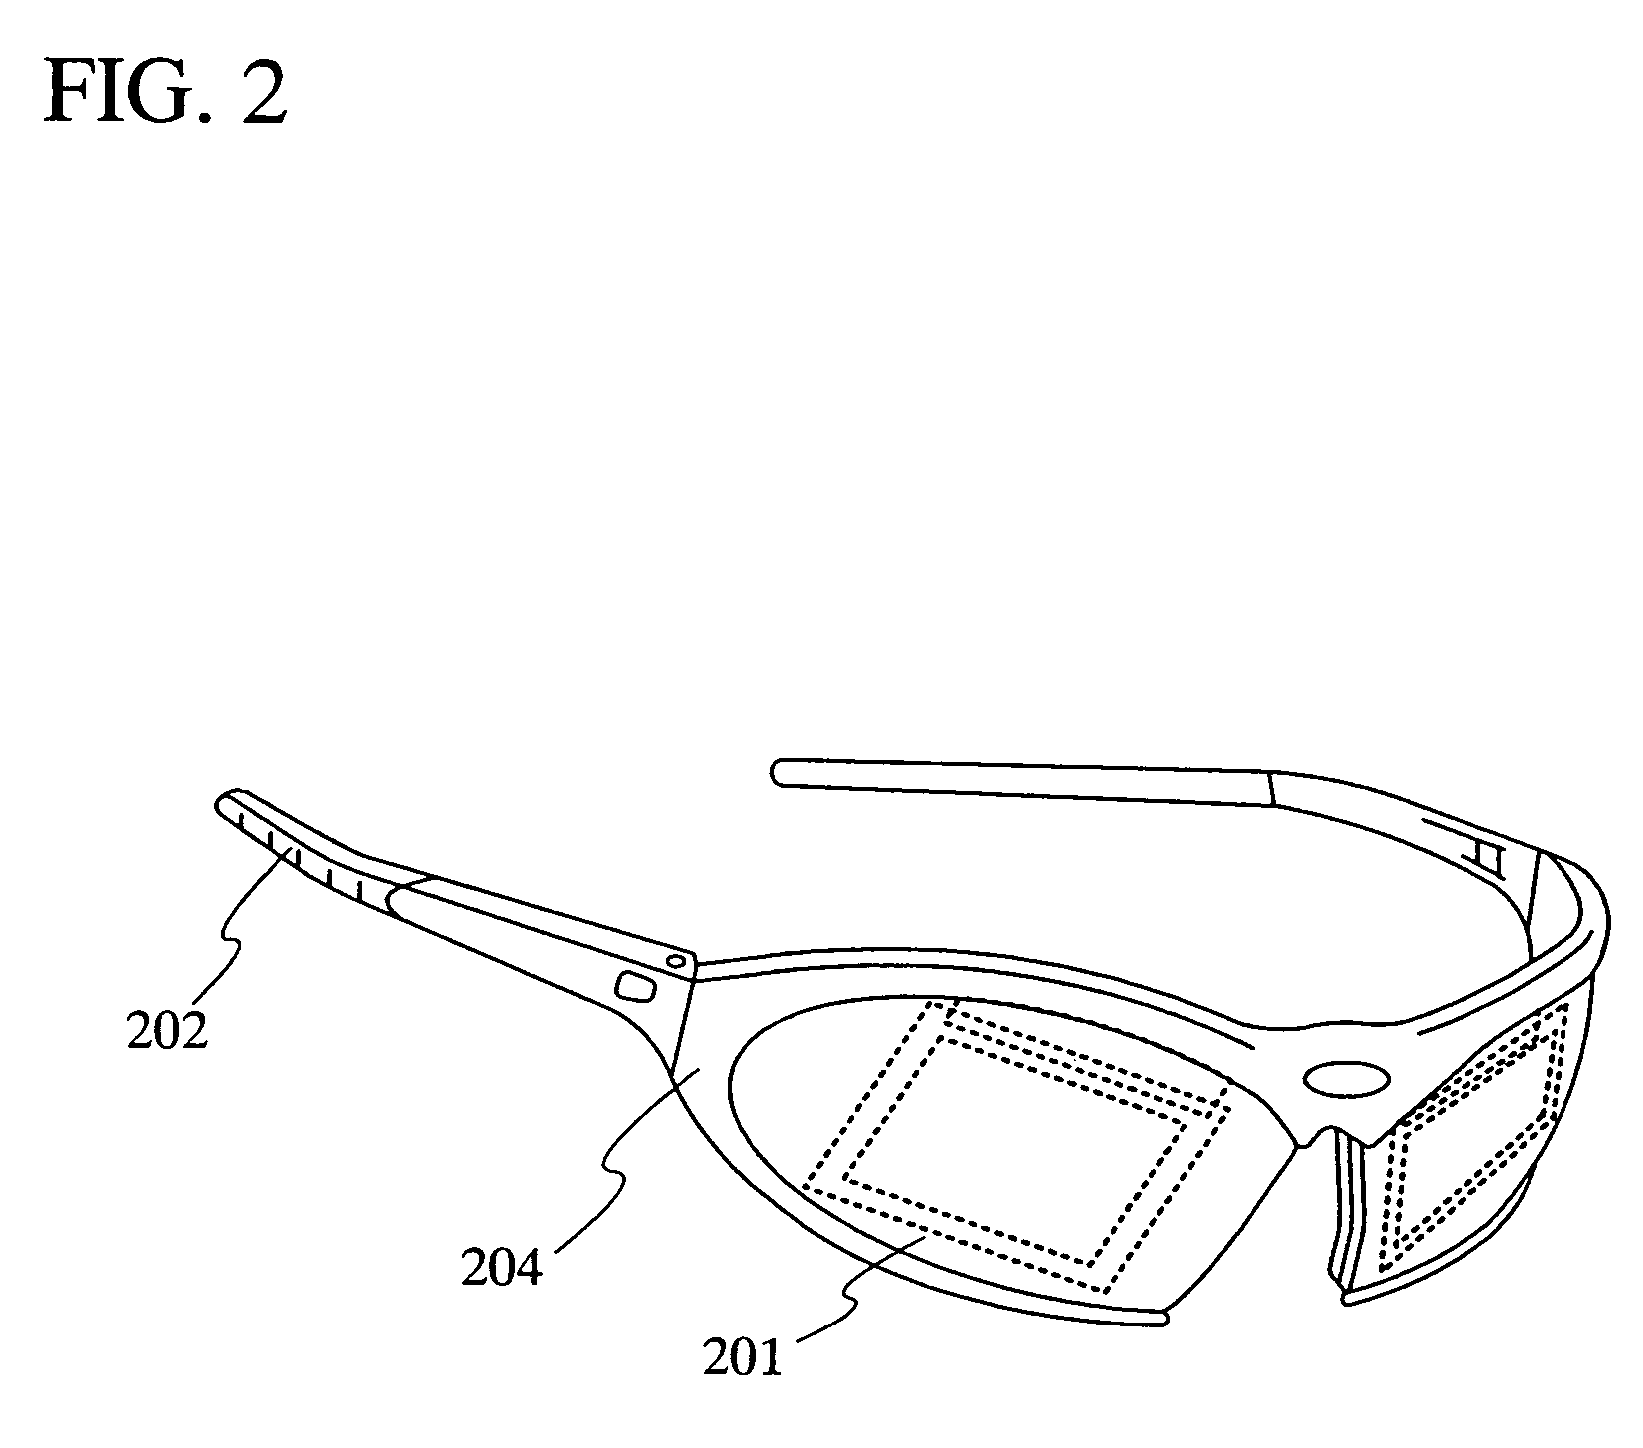 Display device and telecommunication system